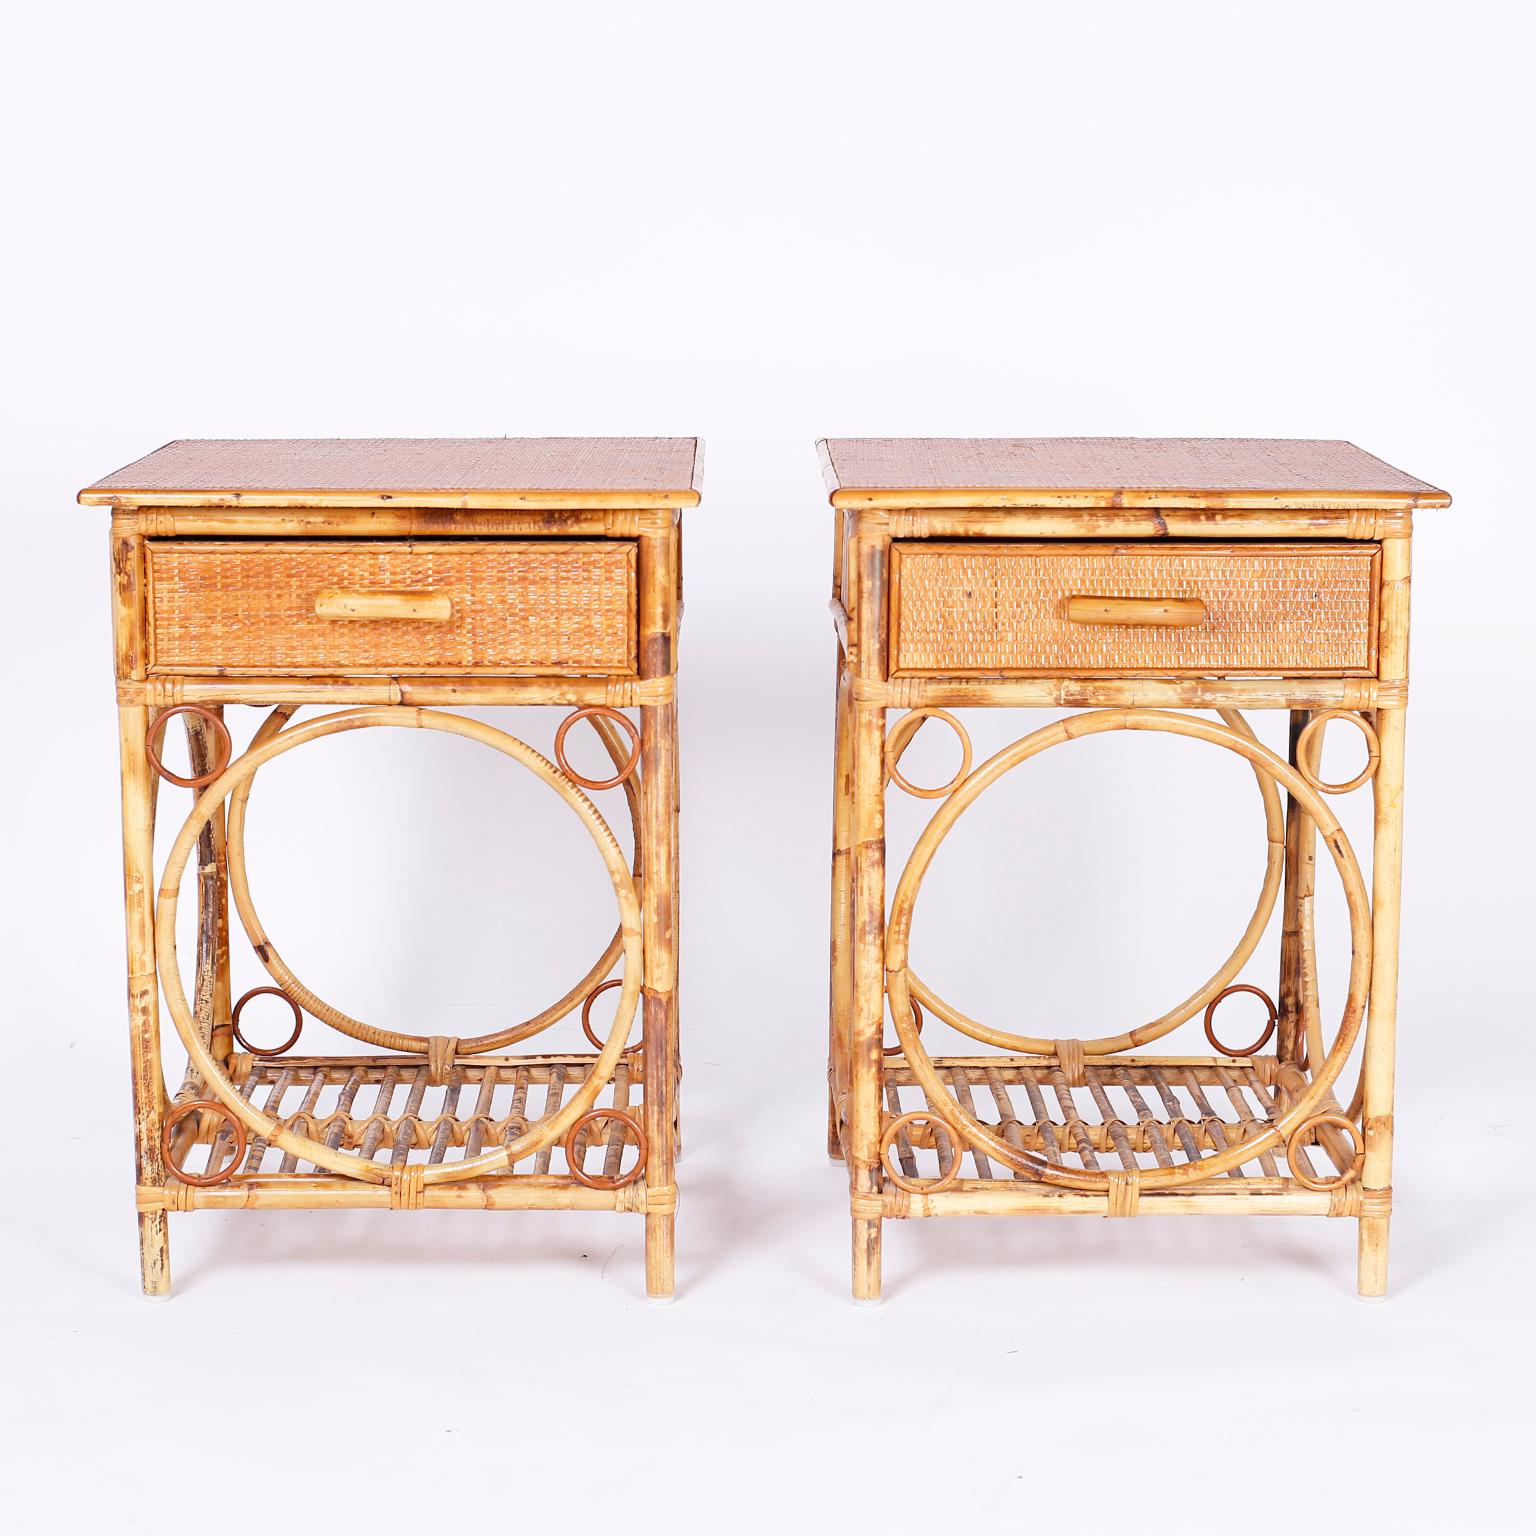 Pair of British Colonial nightstands or end tables with grass cloth on the tops and drawer fronts. The bases feature a bent bamboo technique that highlights the open storage space.